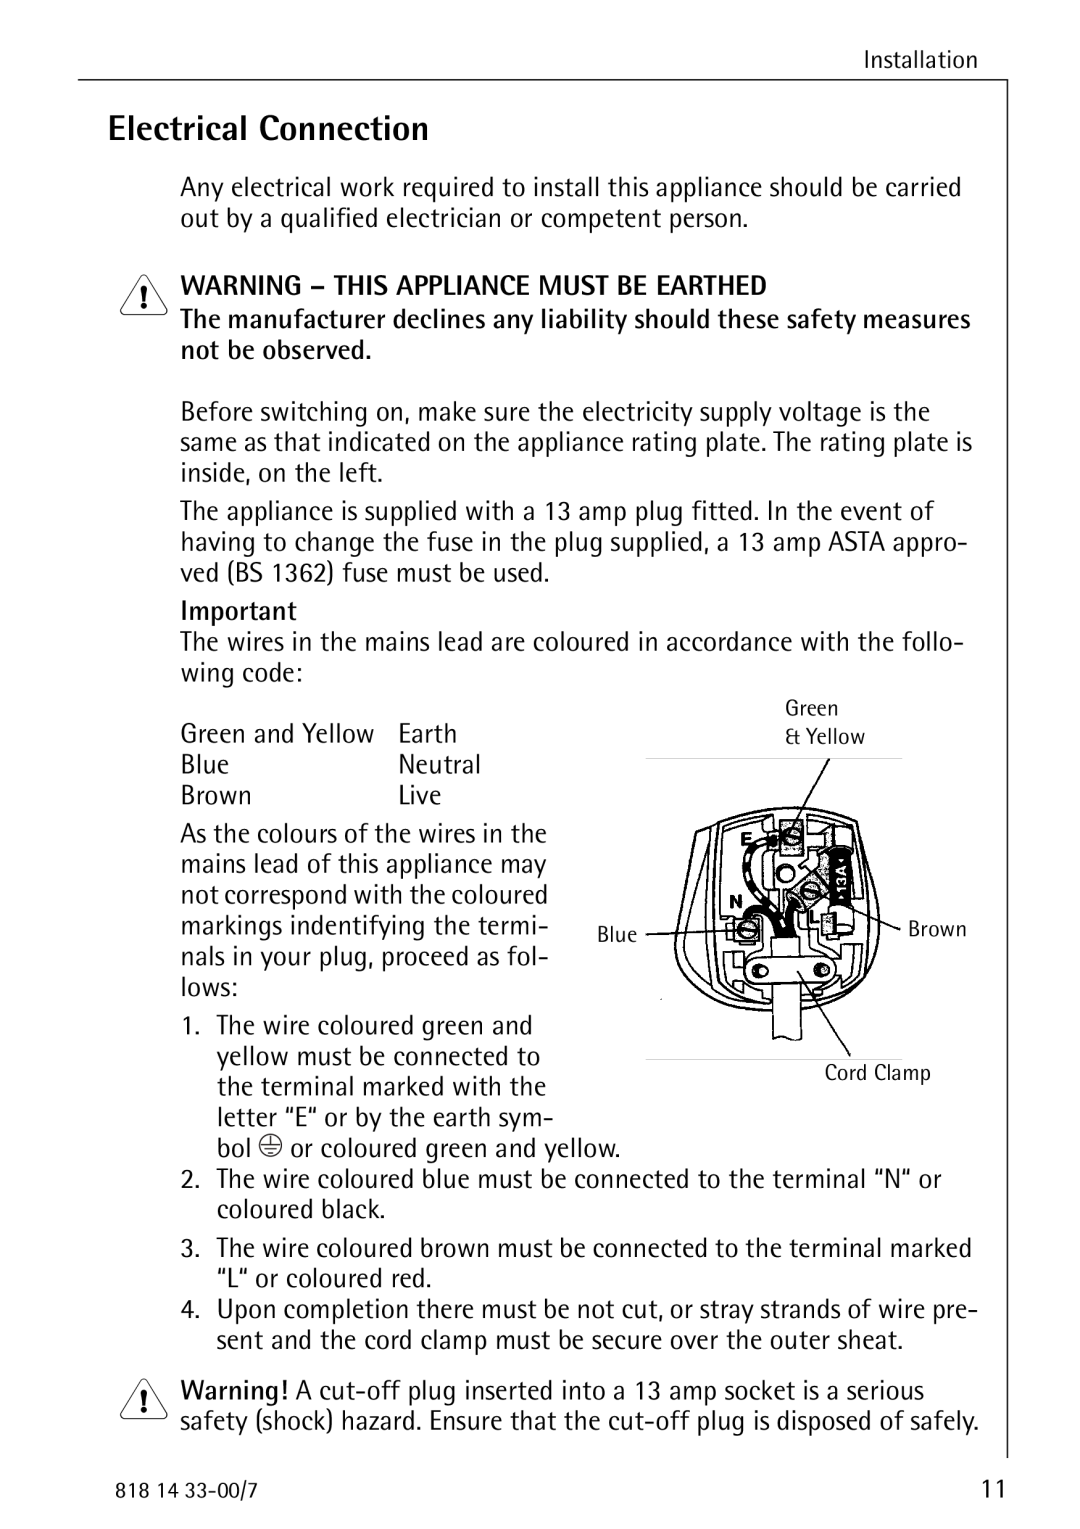 Electrolux 2170-4 operating instructions Electrical Connection, Warning - This Appliance Must Be Earthed 